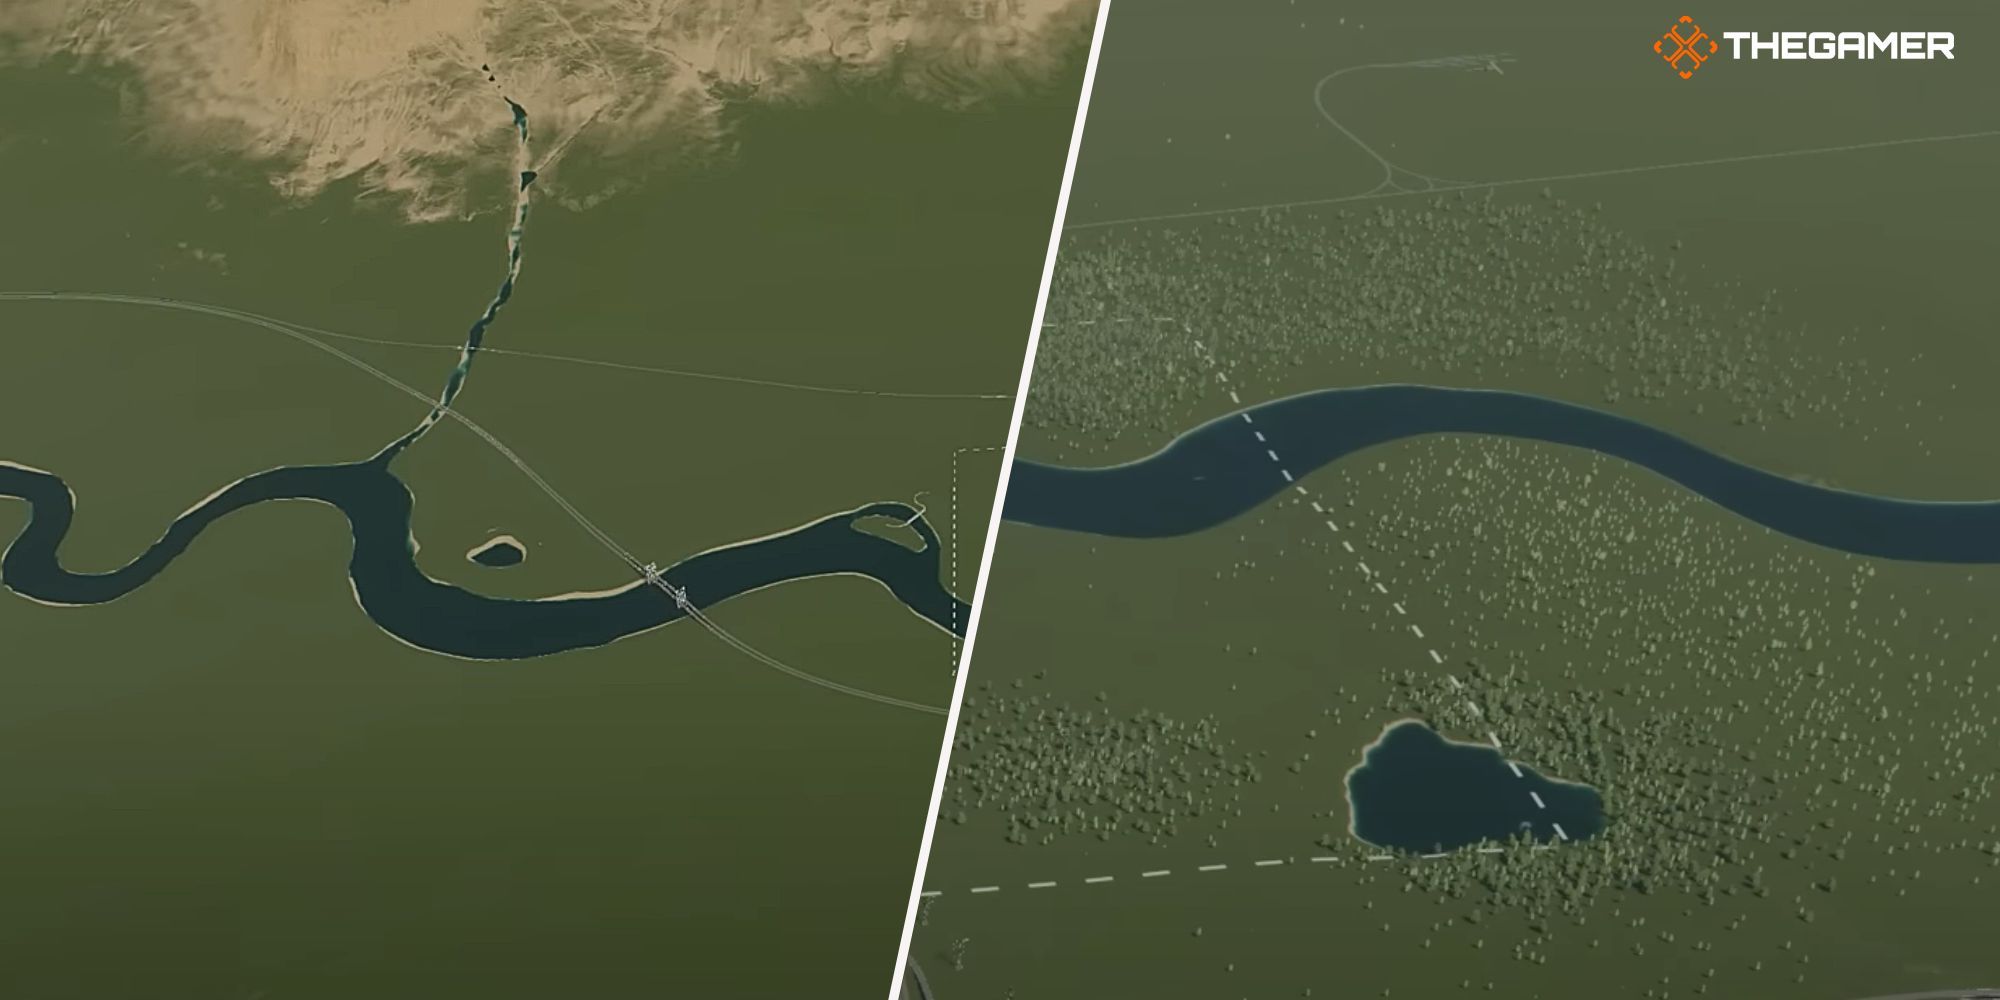  Cities: Skylines 2: Right map with river, Left: ,map with river.